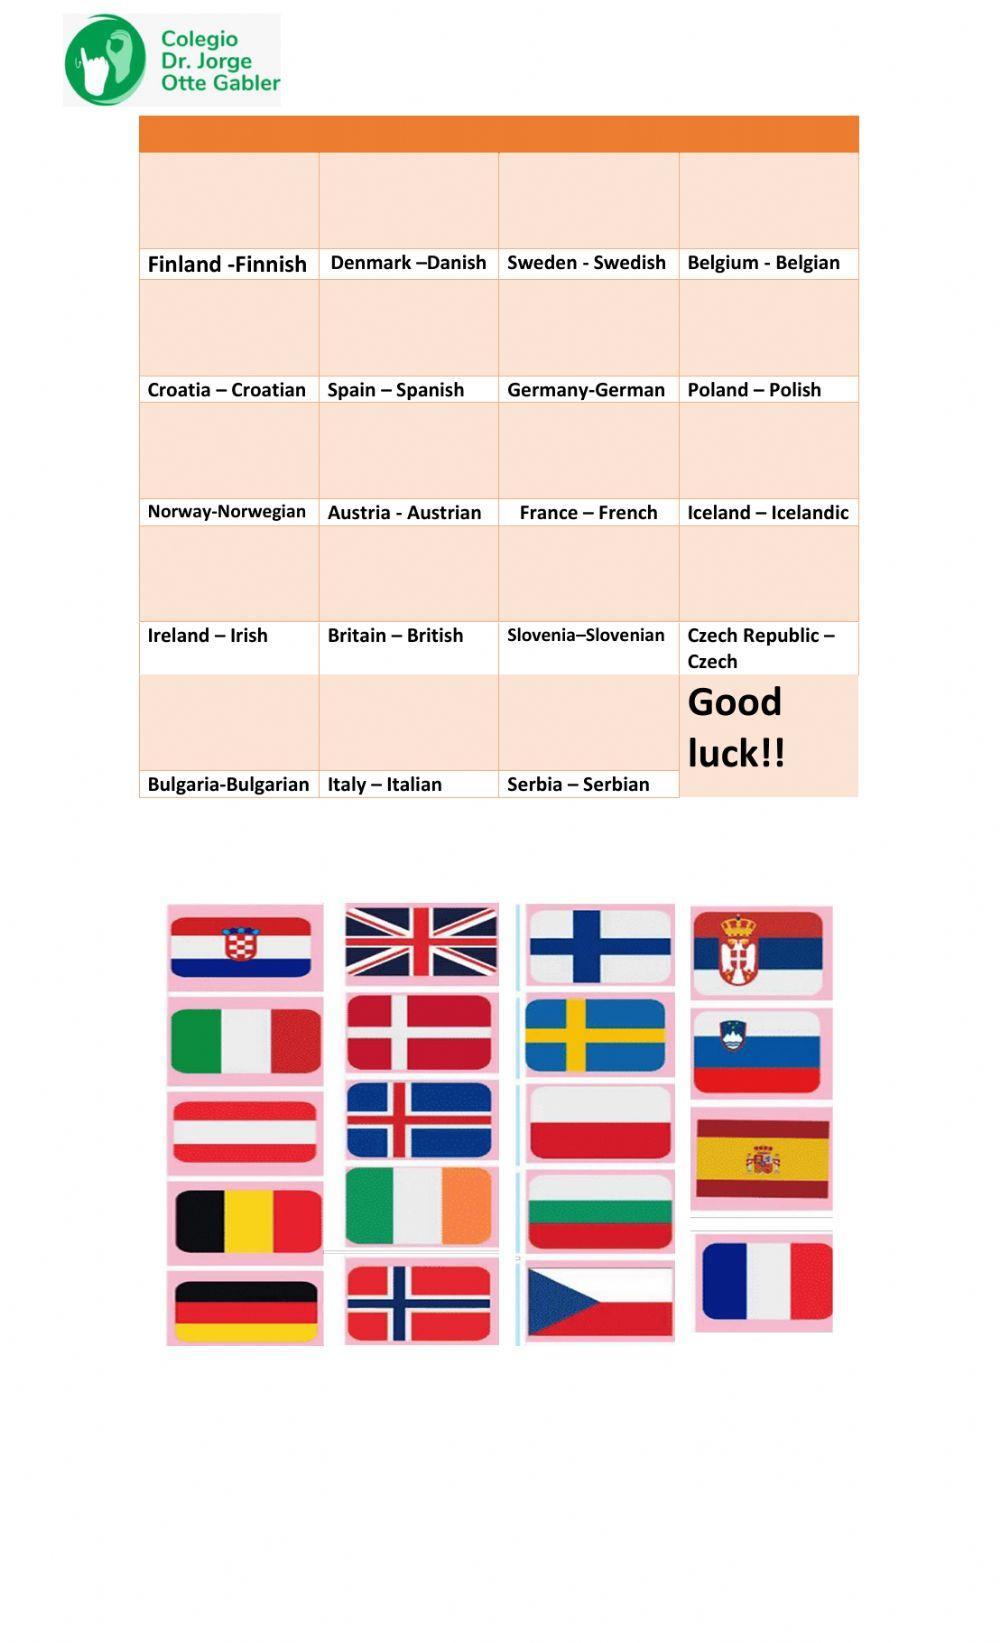 European countries and nationalities